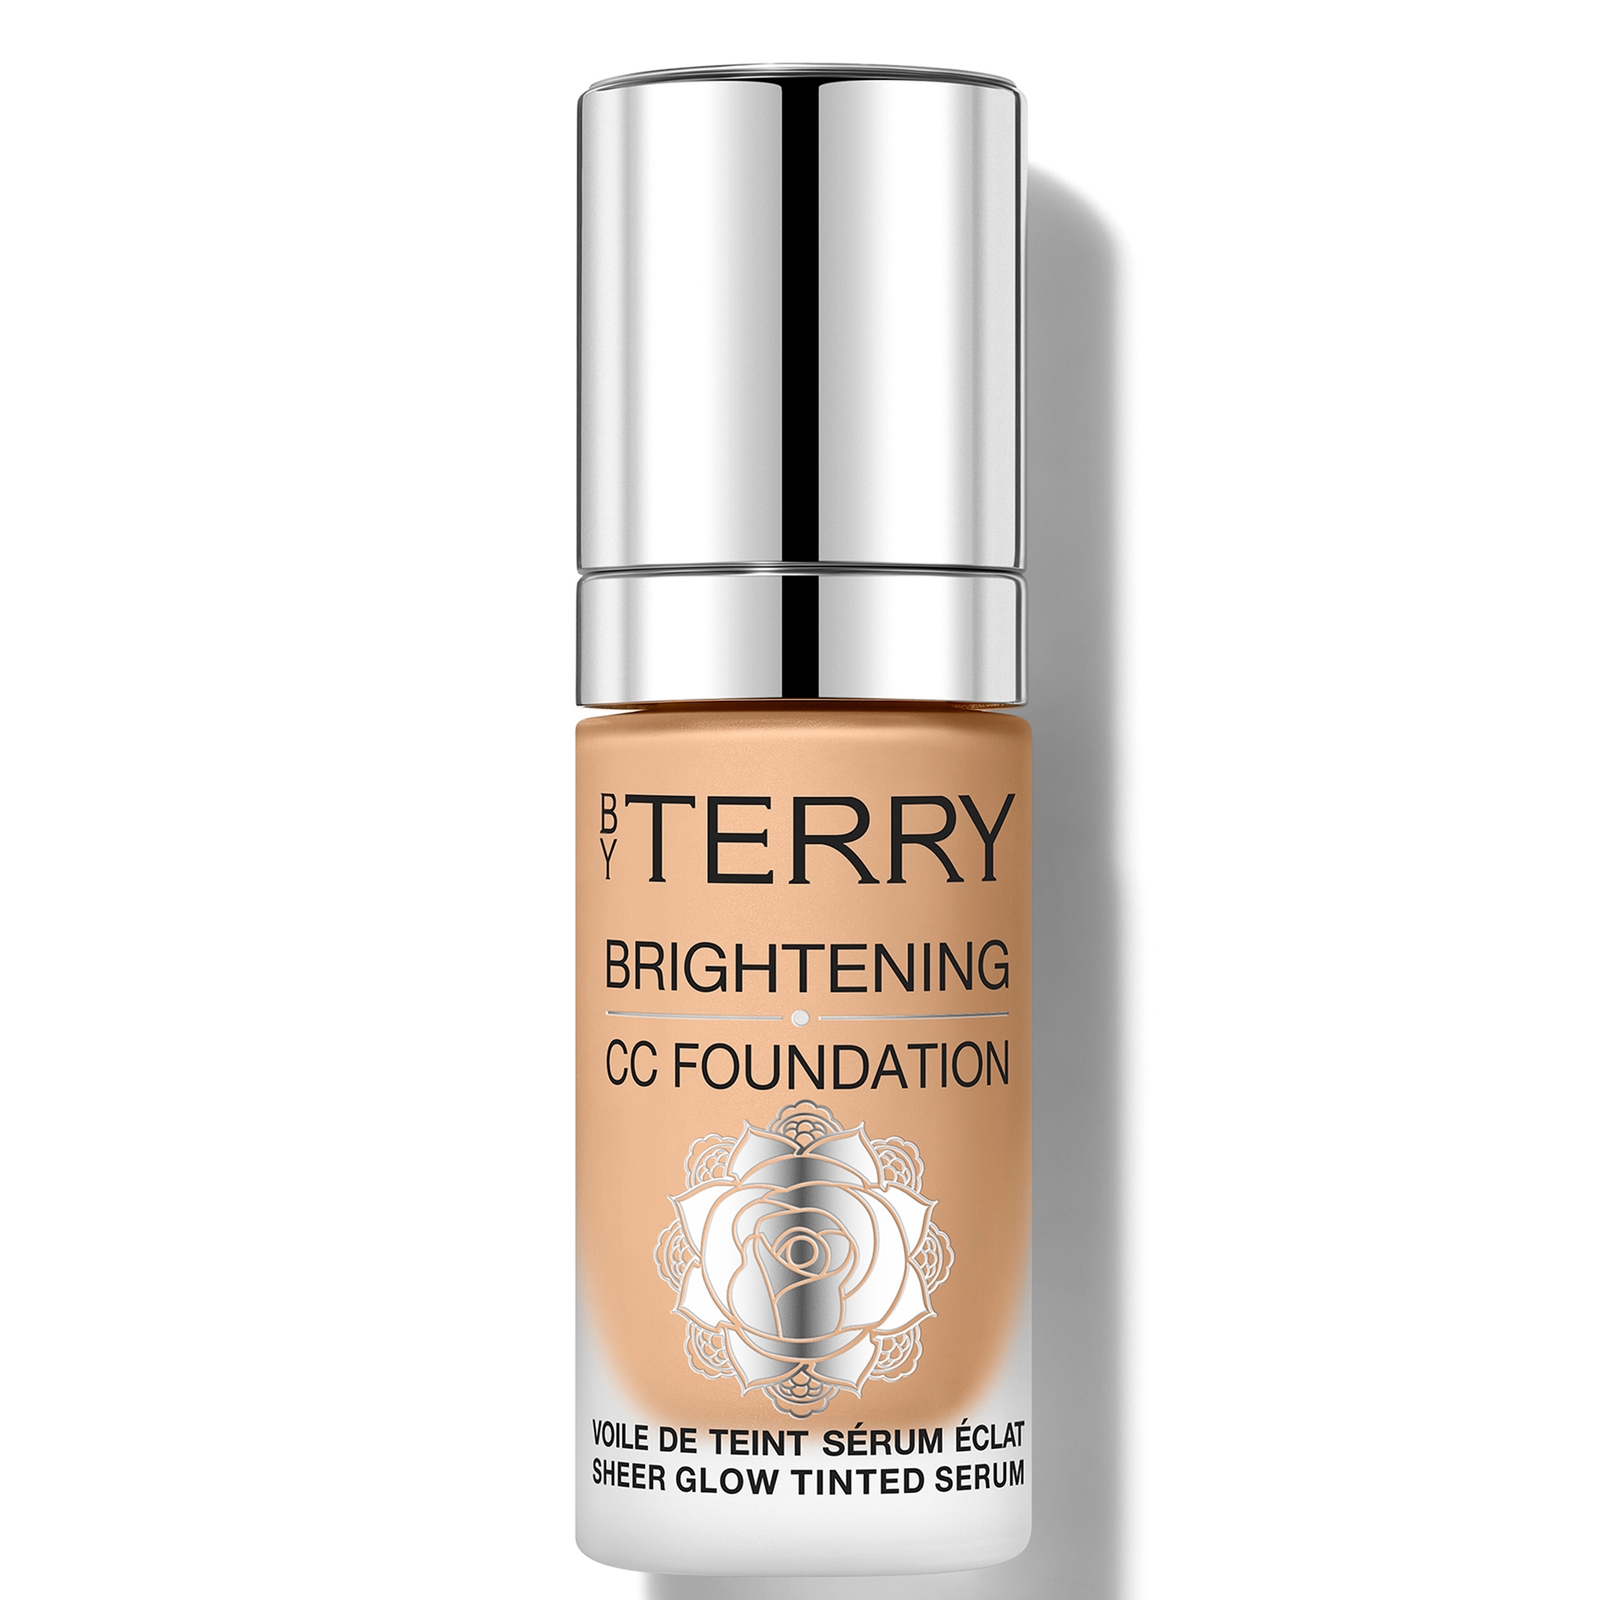 By Terry Brightening Cc Foundation 30ml (various Shades) - 6n - Tan Neutral